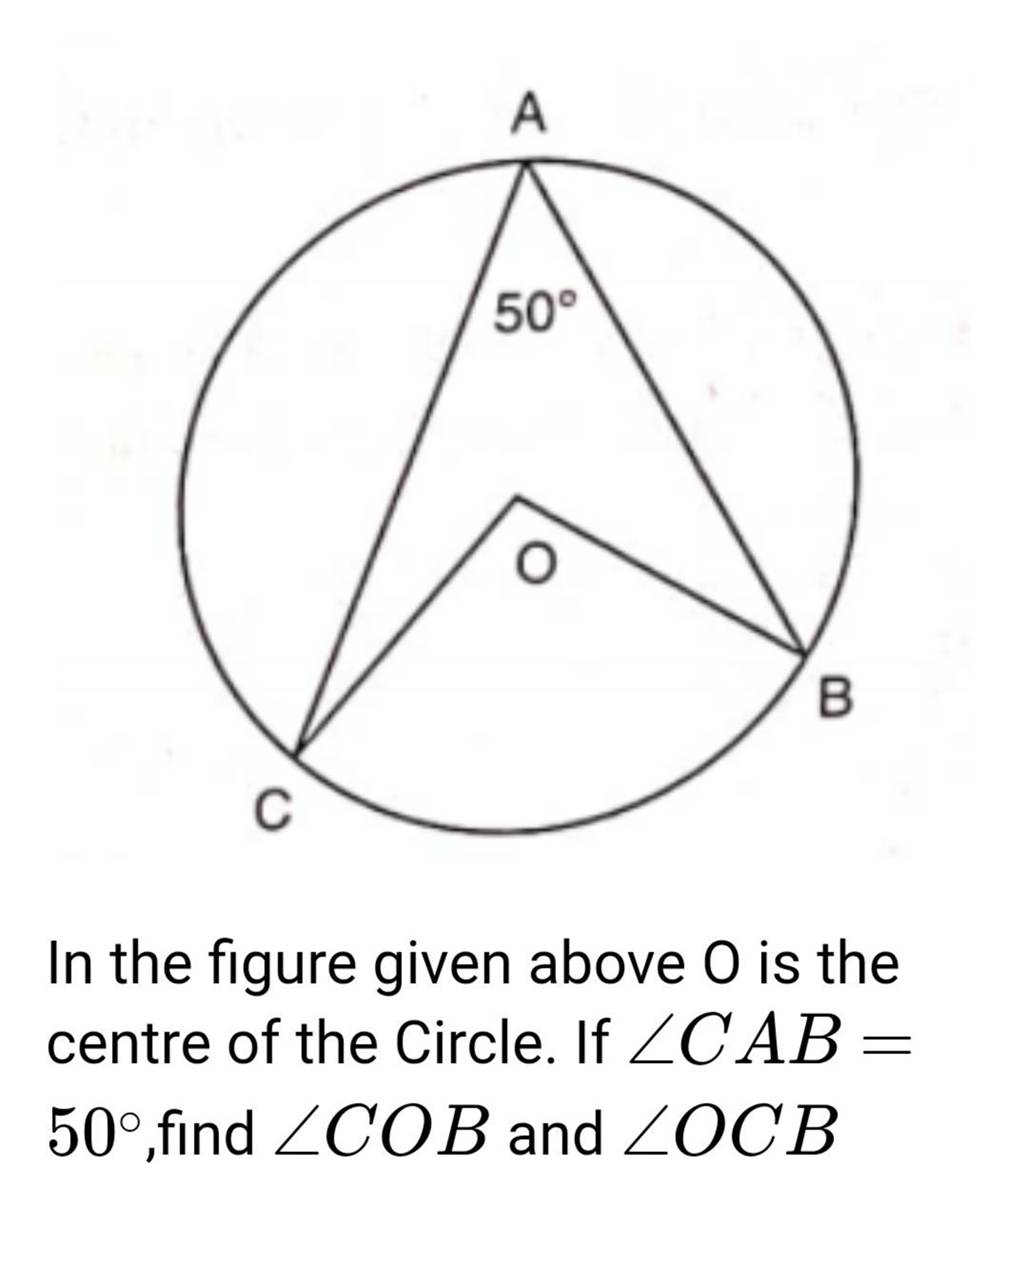 In the figure given above 0 is the centre of the Circle. If ∠CAB= 50∘,